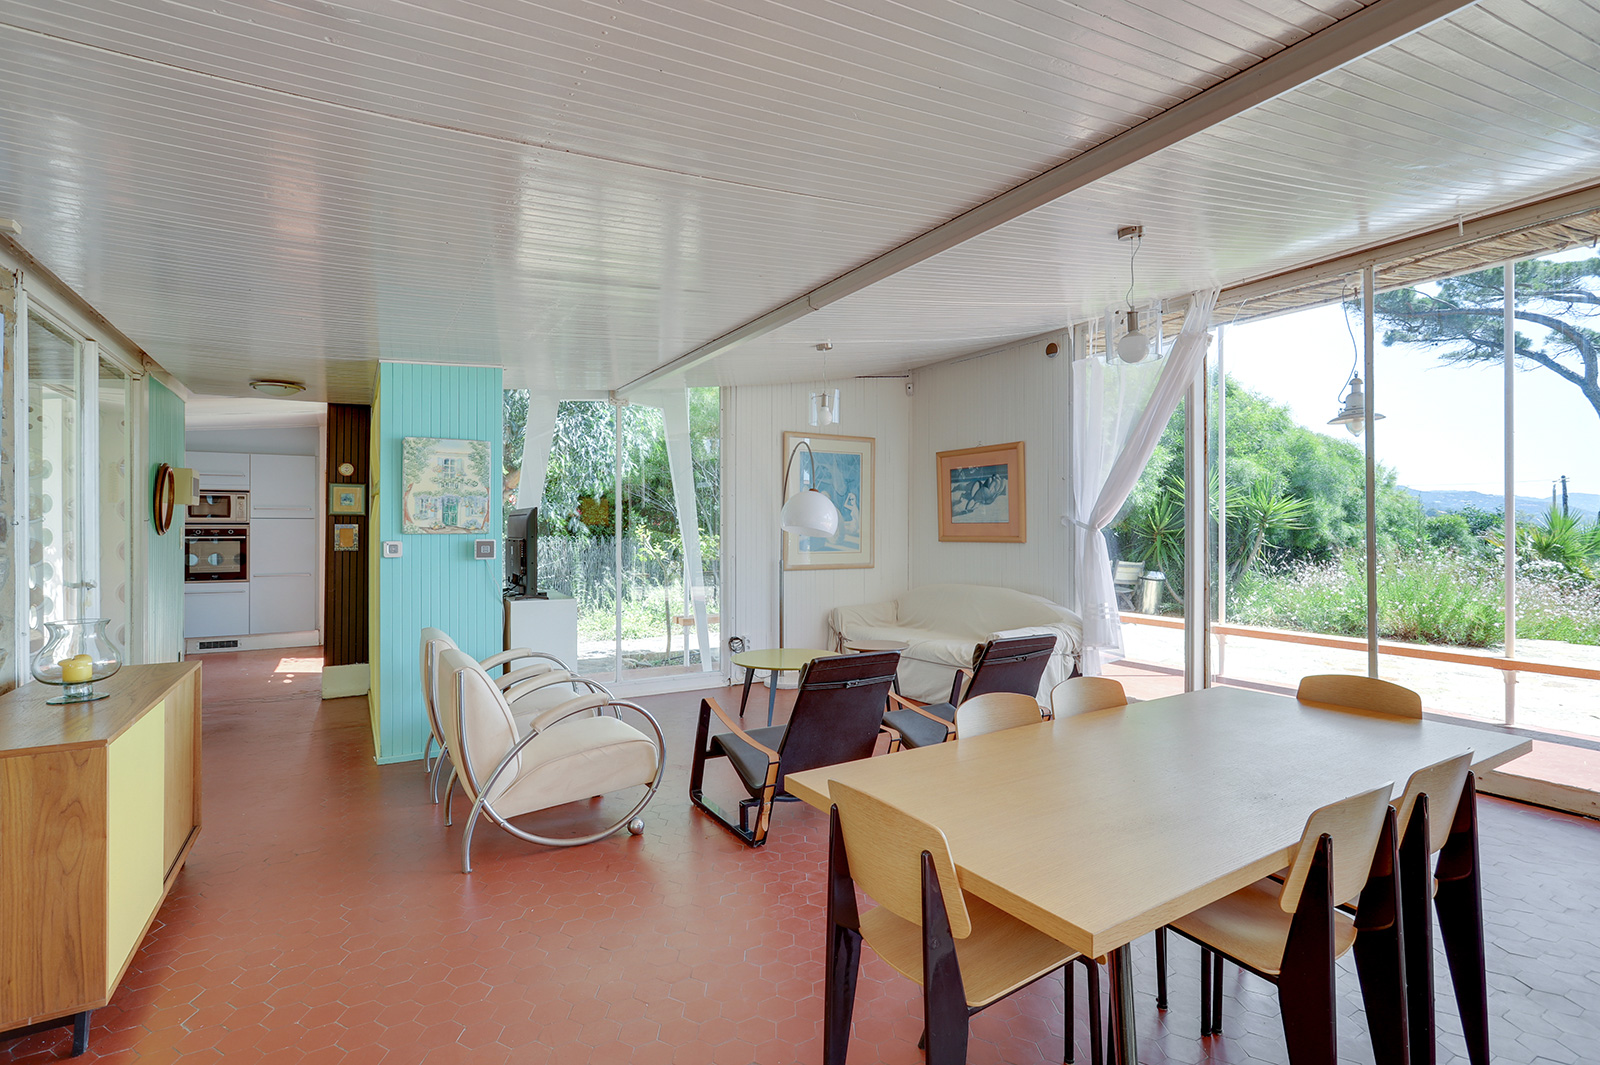 Villa Dollander for sale on the Cote d'Azur was designed by the Prouve brothers